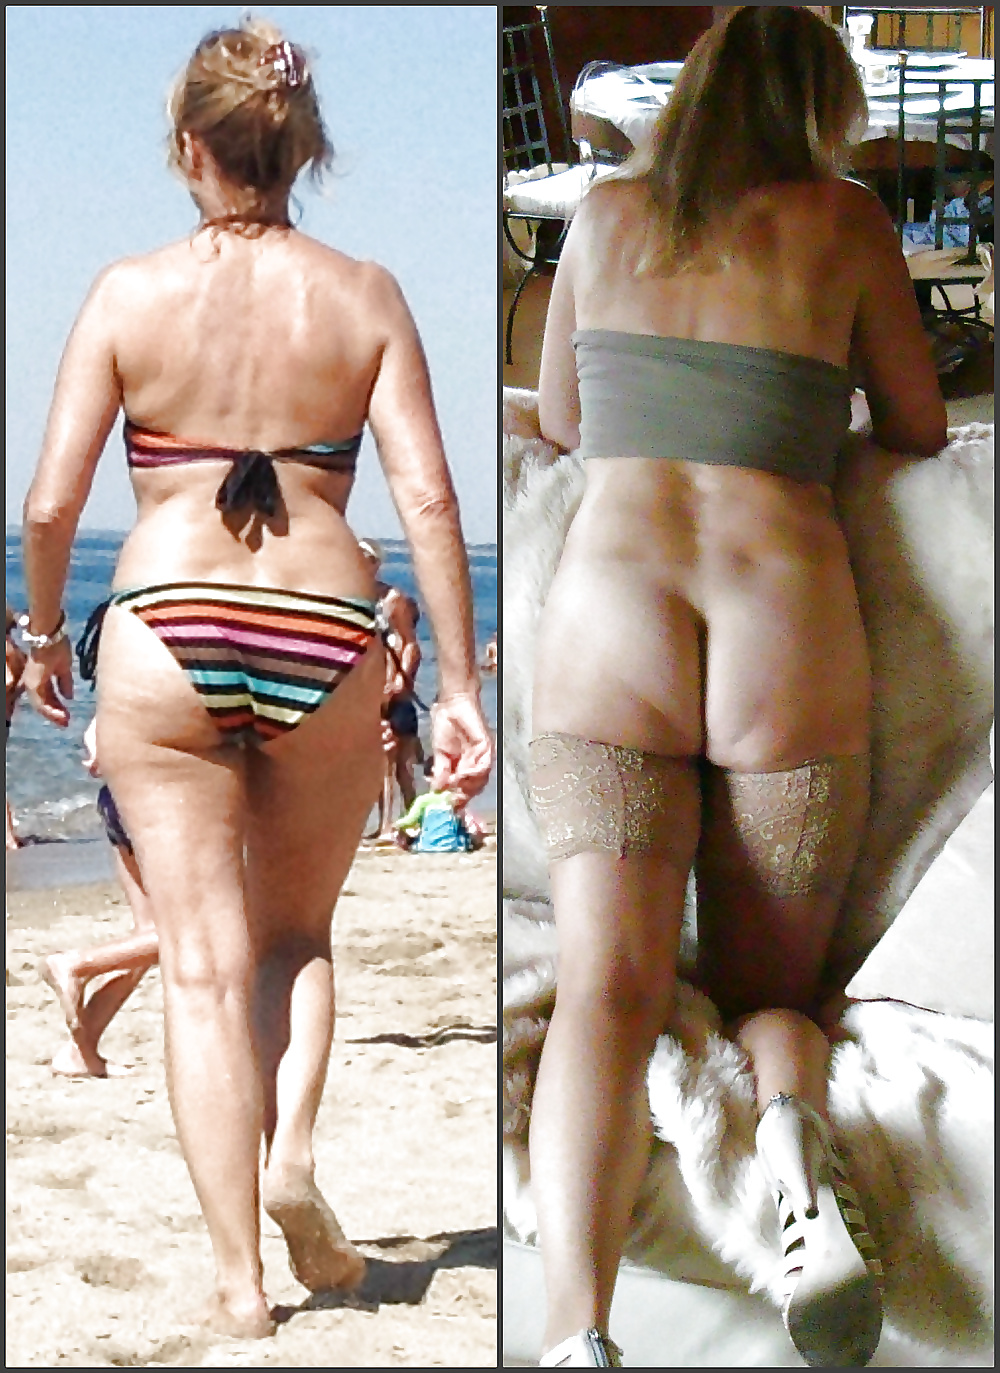 Even cellulite can makes a woman so sexy... (5/19)